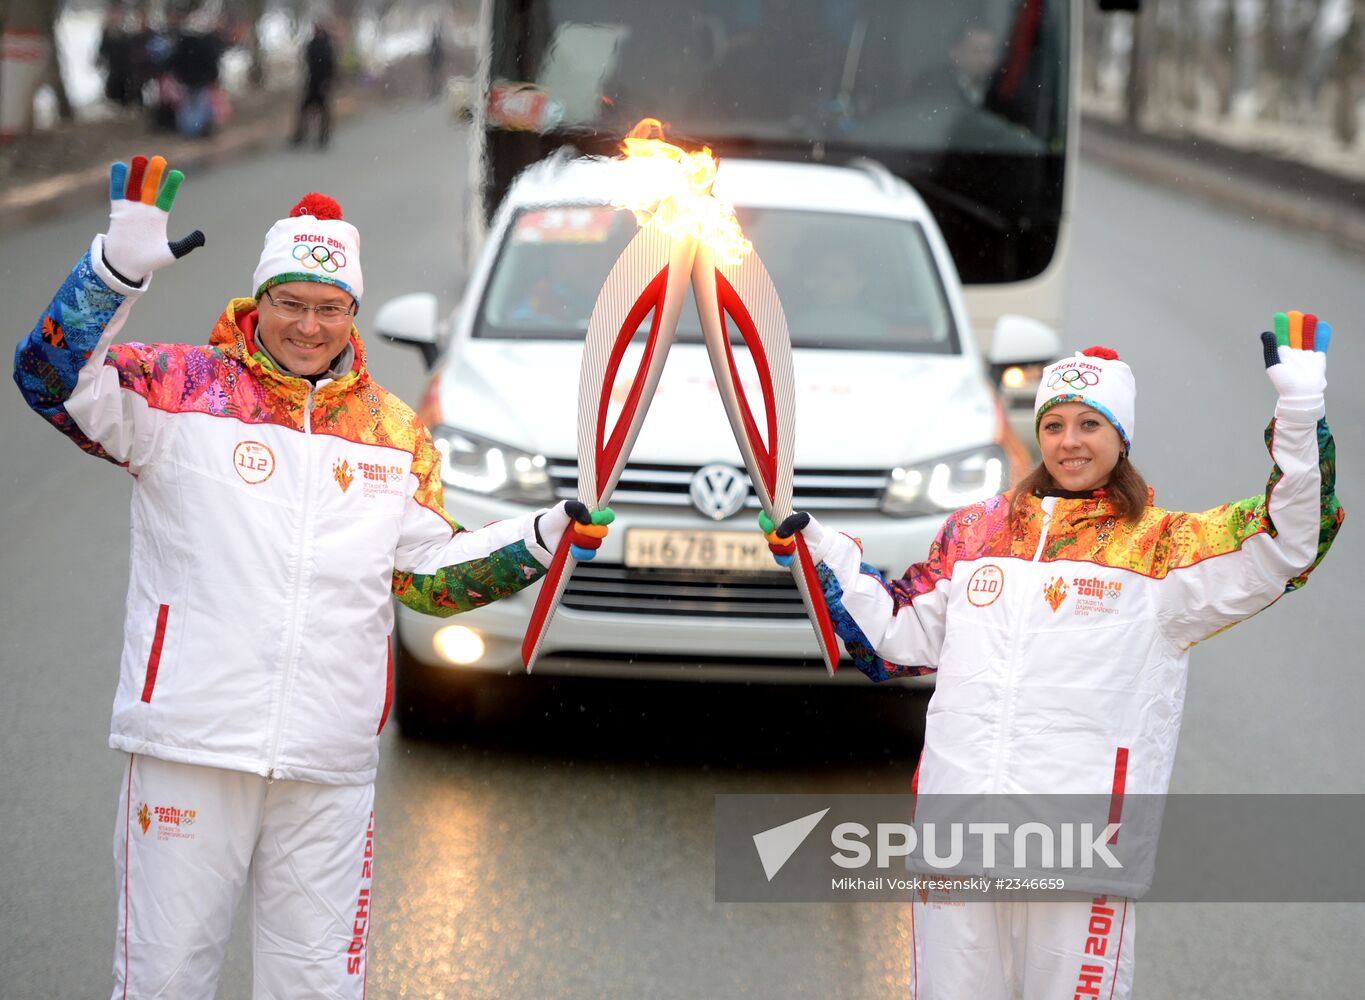 Olympic torch relay in Saransk